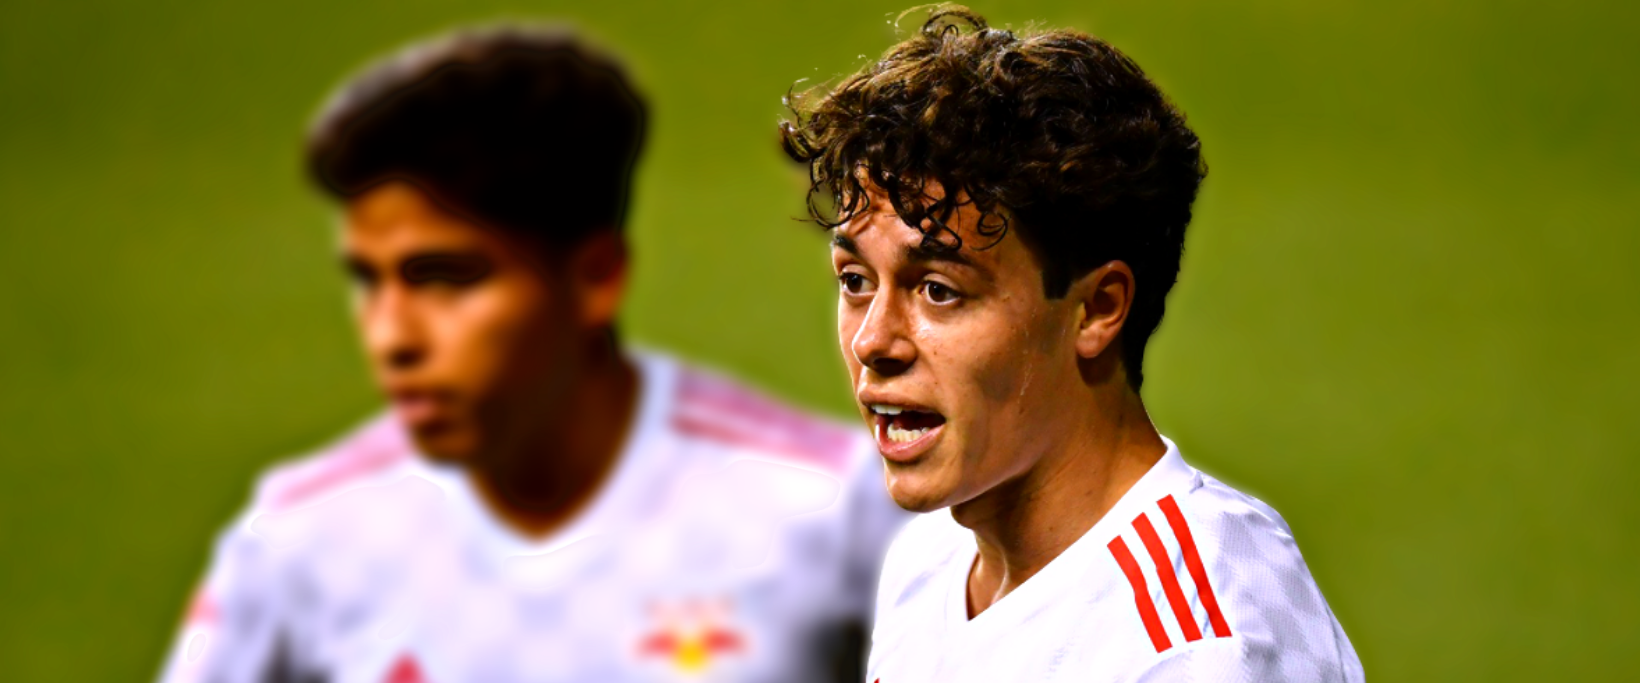 Will Caden Clark be a worthy addition to RB Leipzig?